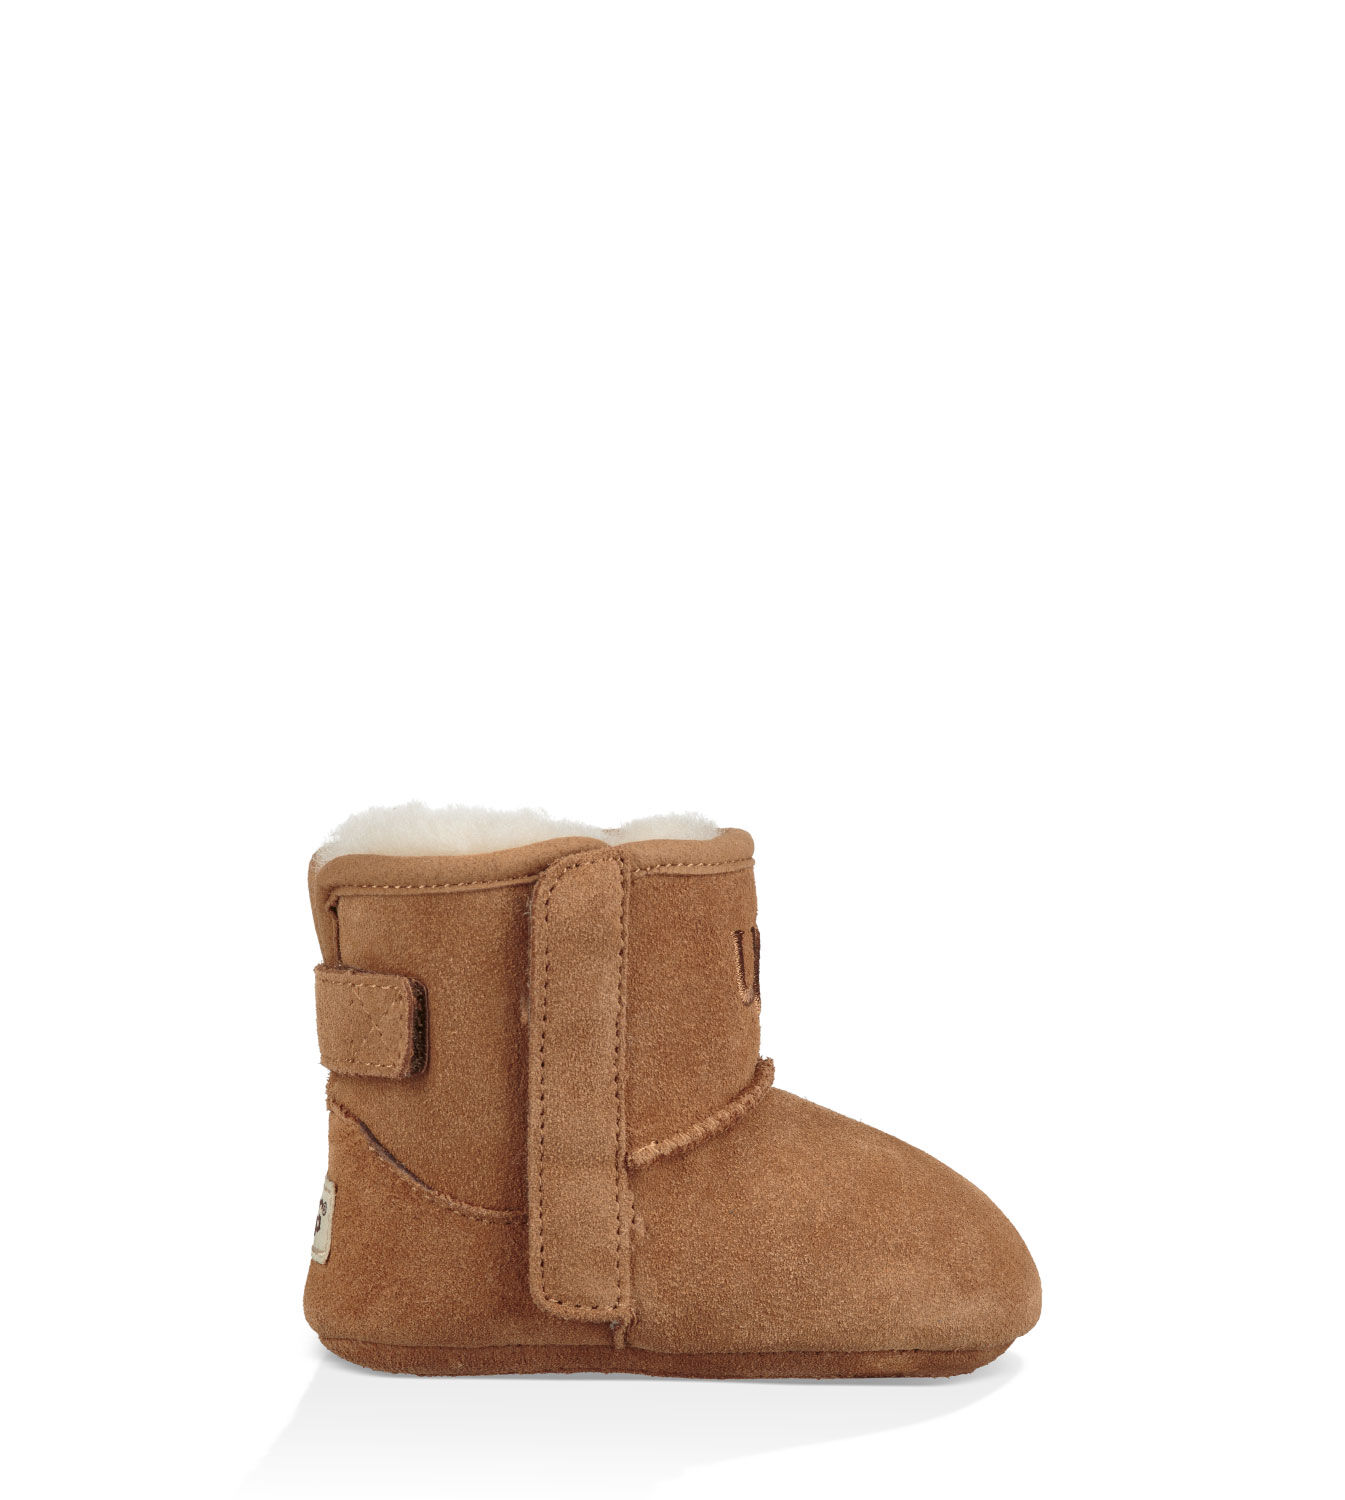 ugg boots for sales in uk